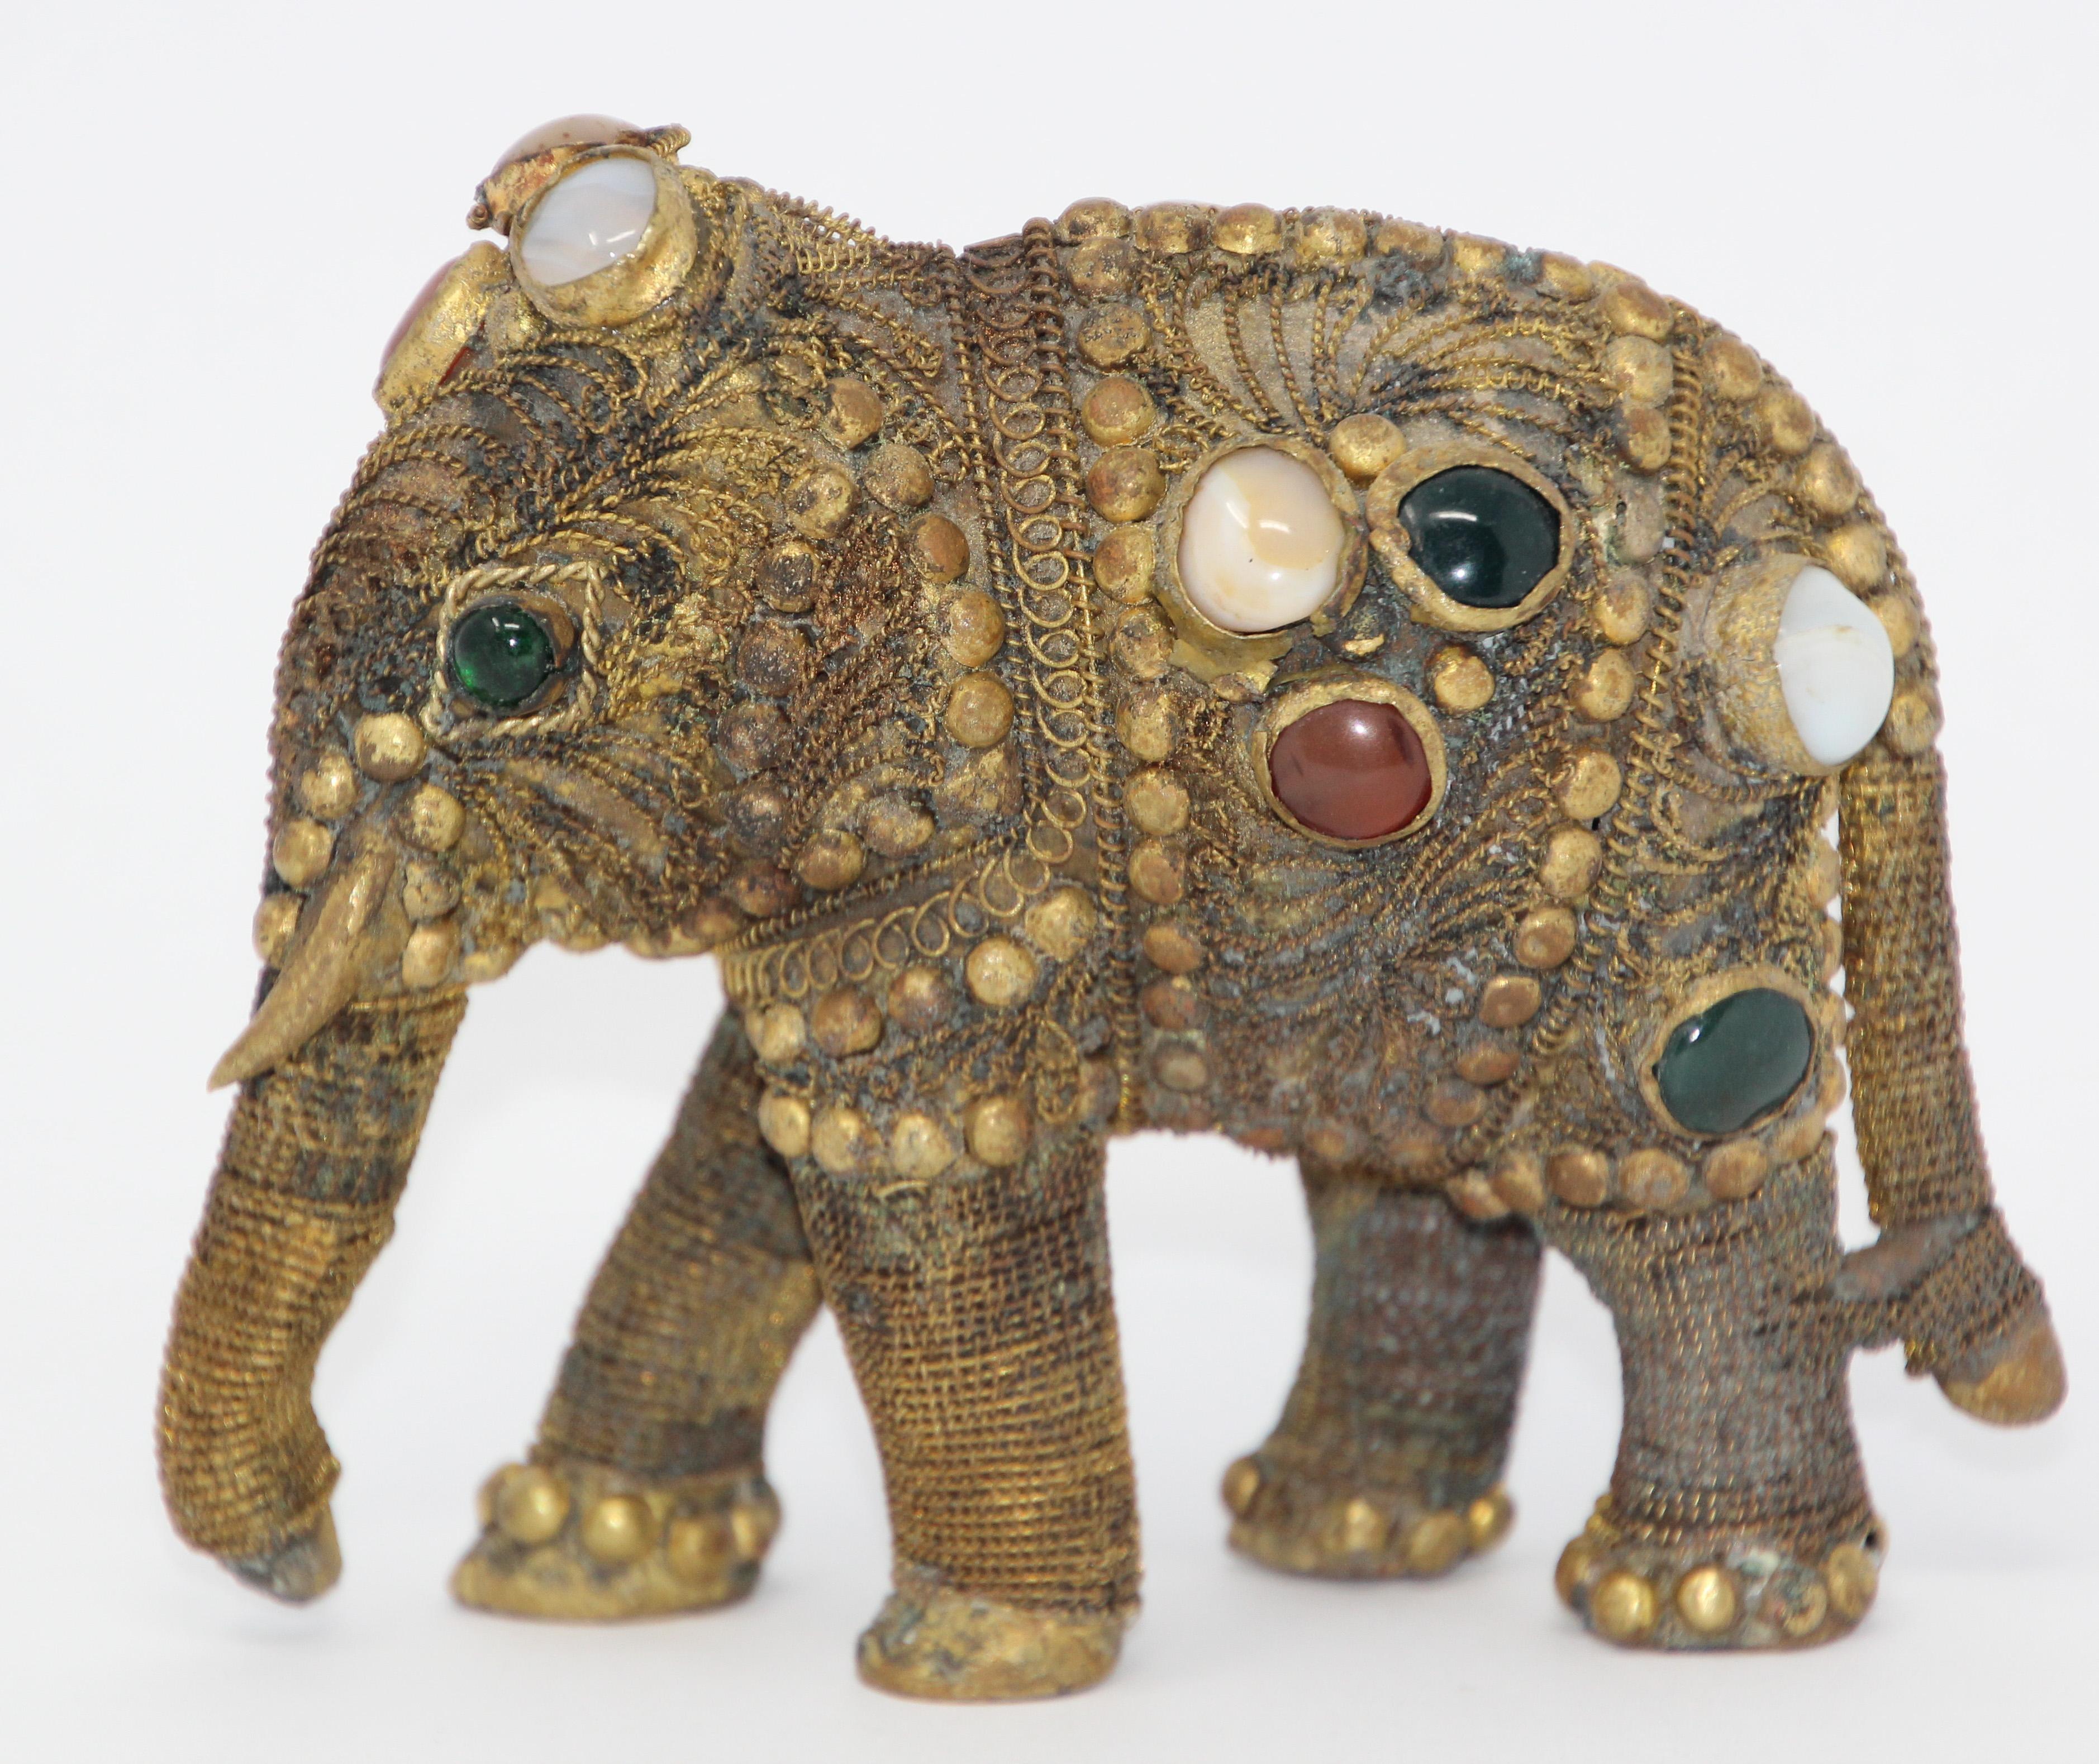 Vintage brass jeweled elephant sculpture paper weight.
Vintage solid brass elephant sculpture with semi precious gem stones and filigree adornment and filigree work. 
Rare decorative brass filigree elephant with intricate design heavily inlaid